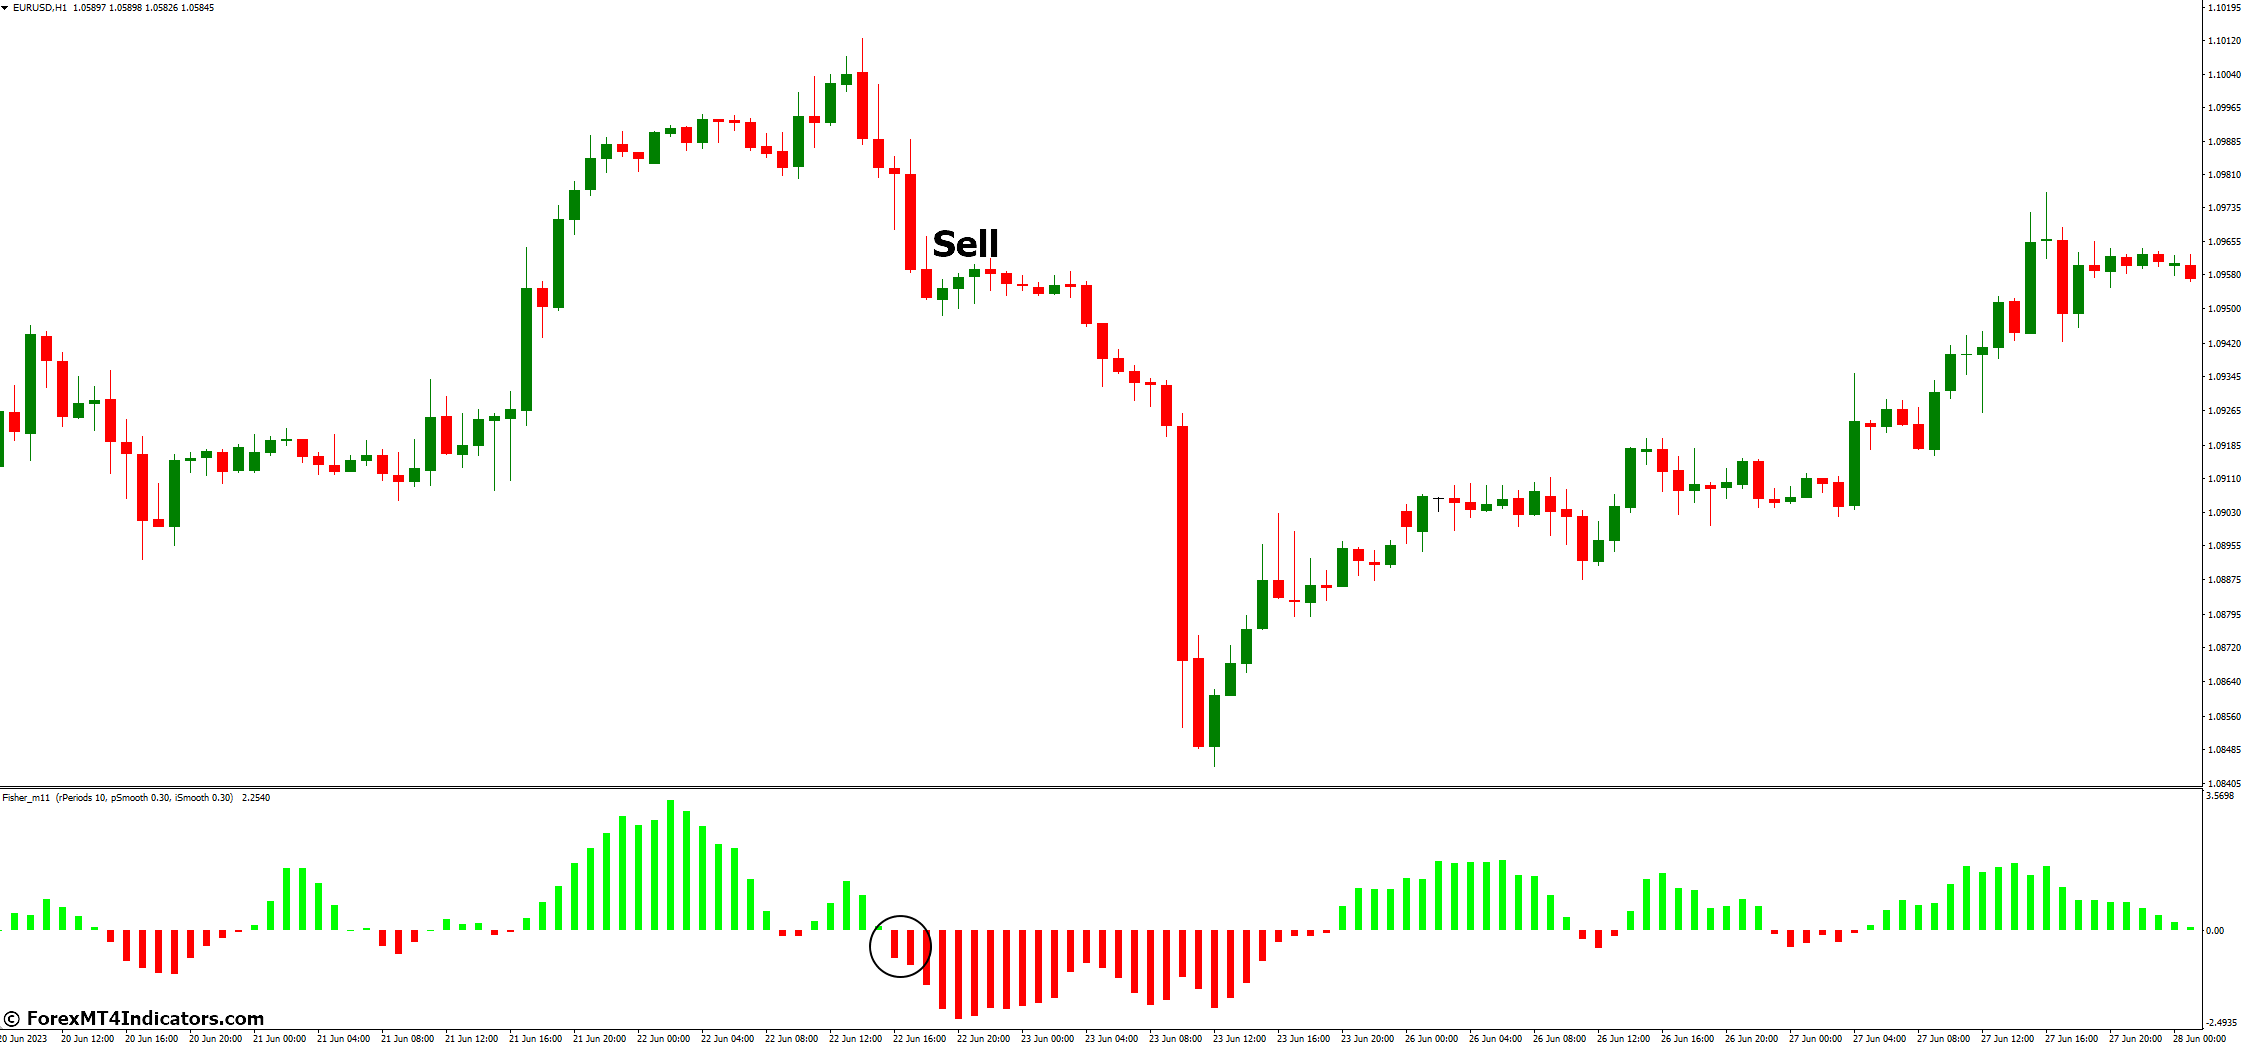 How to Trade with Fisher No Repainting MT4 Indicator - Sell Entry